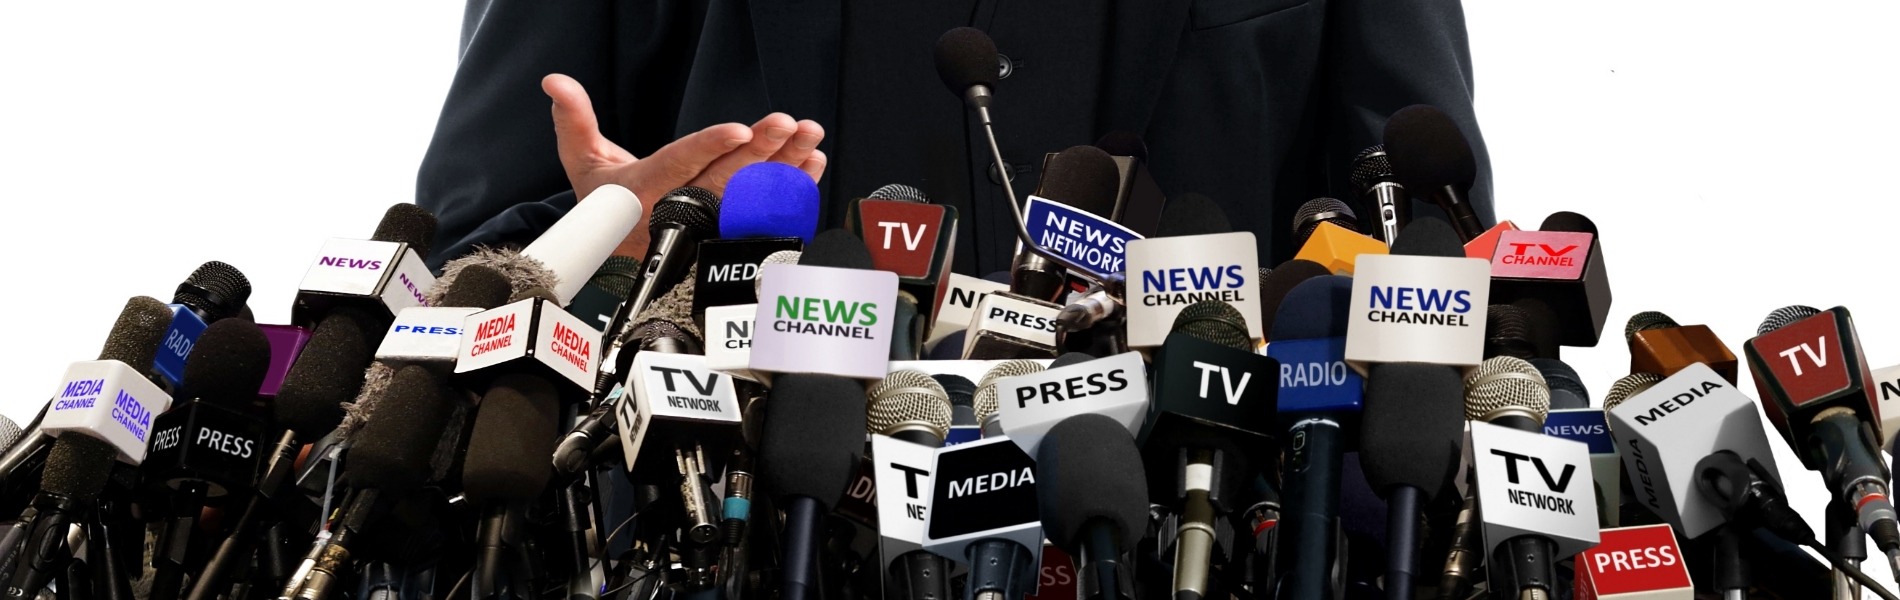 Media Training: How To Prepare for A Media Interview 